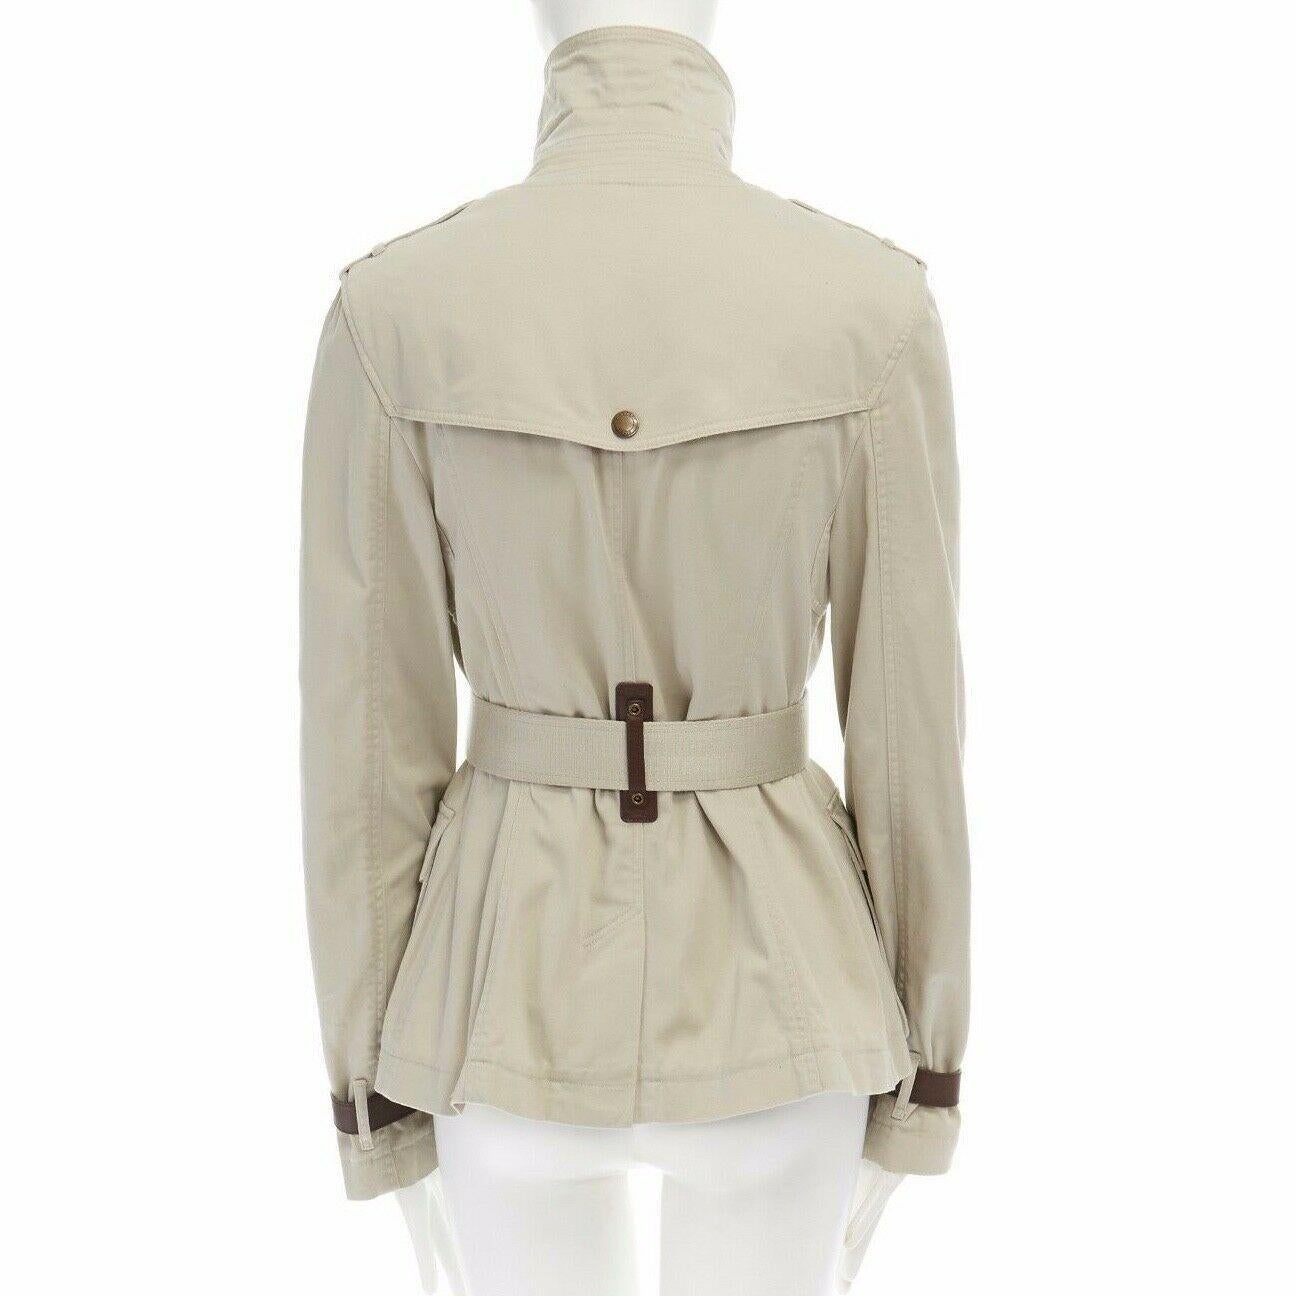 BURBERRY BRIT beige cotton leather trimmed belted safari trench field jacket M

BURBERRY BRIT
Cotton, leather. Beige cotton body. Stand collar with brown leather strap detail at collar. Gold-tone buckle signed Burberry. Zip front closure. Leather